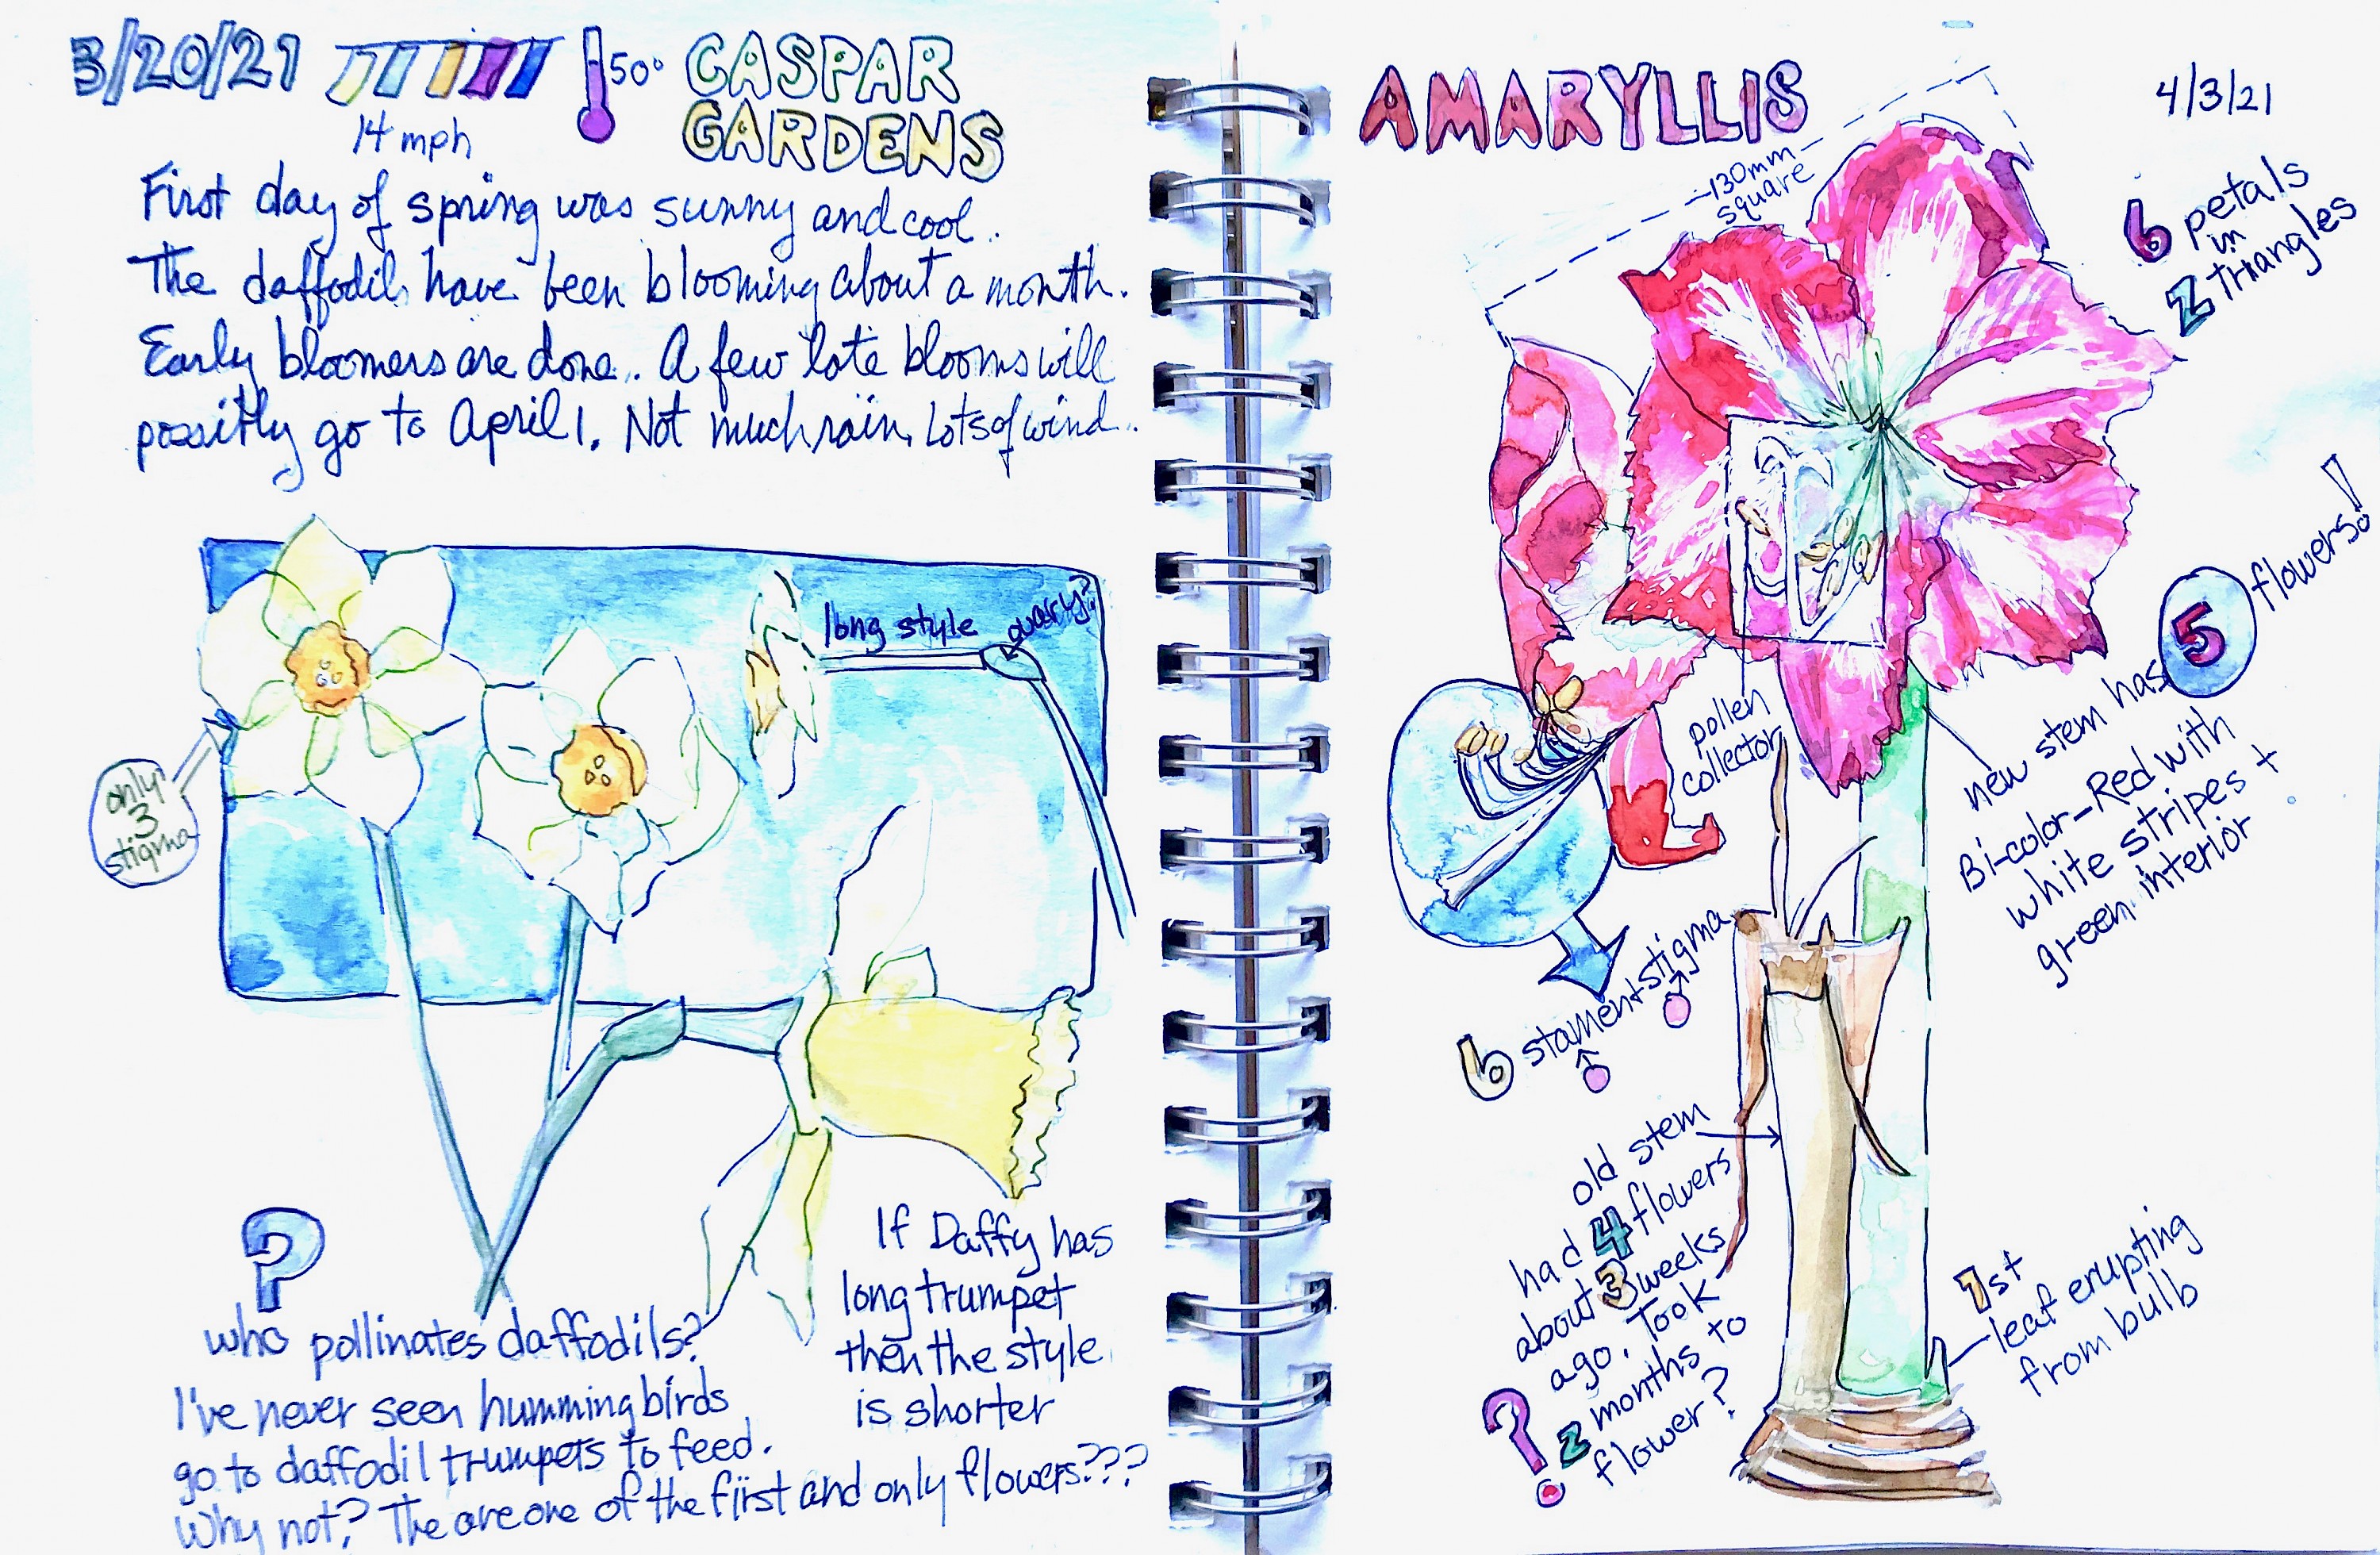 A Nature Art Journal: What's in your nature journal bag…